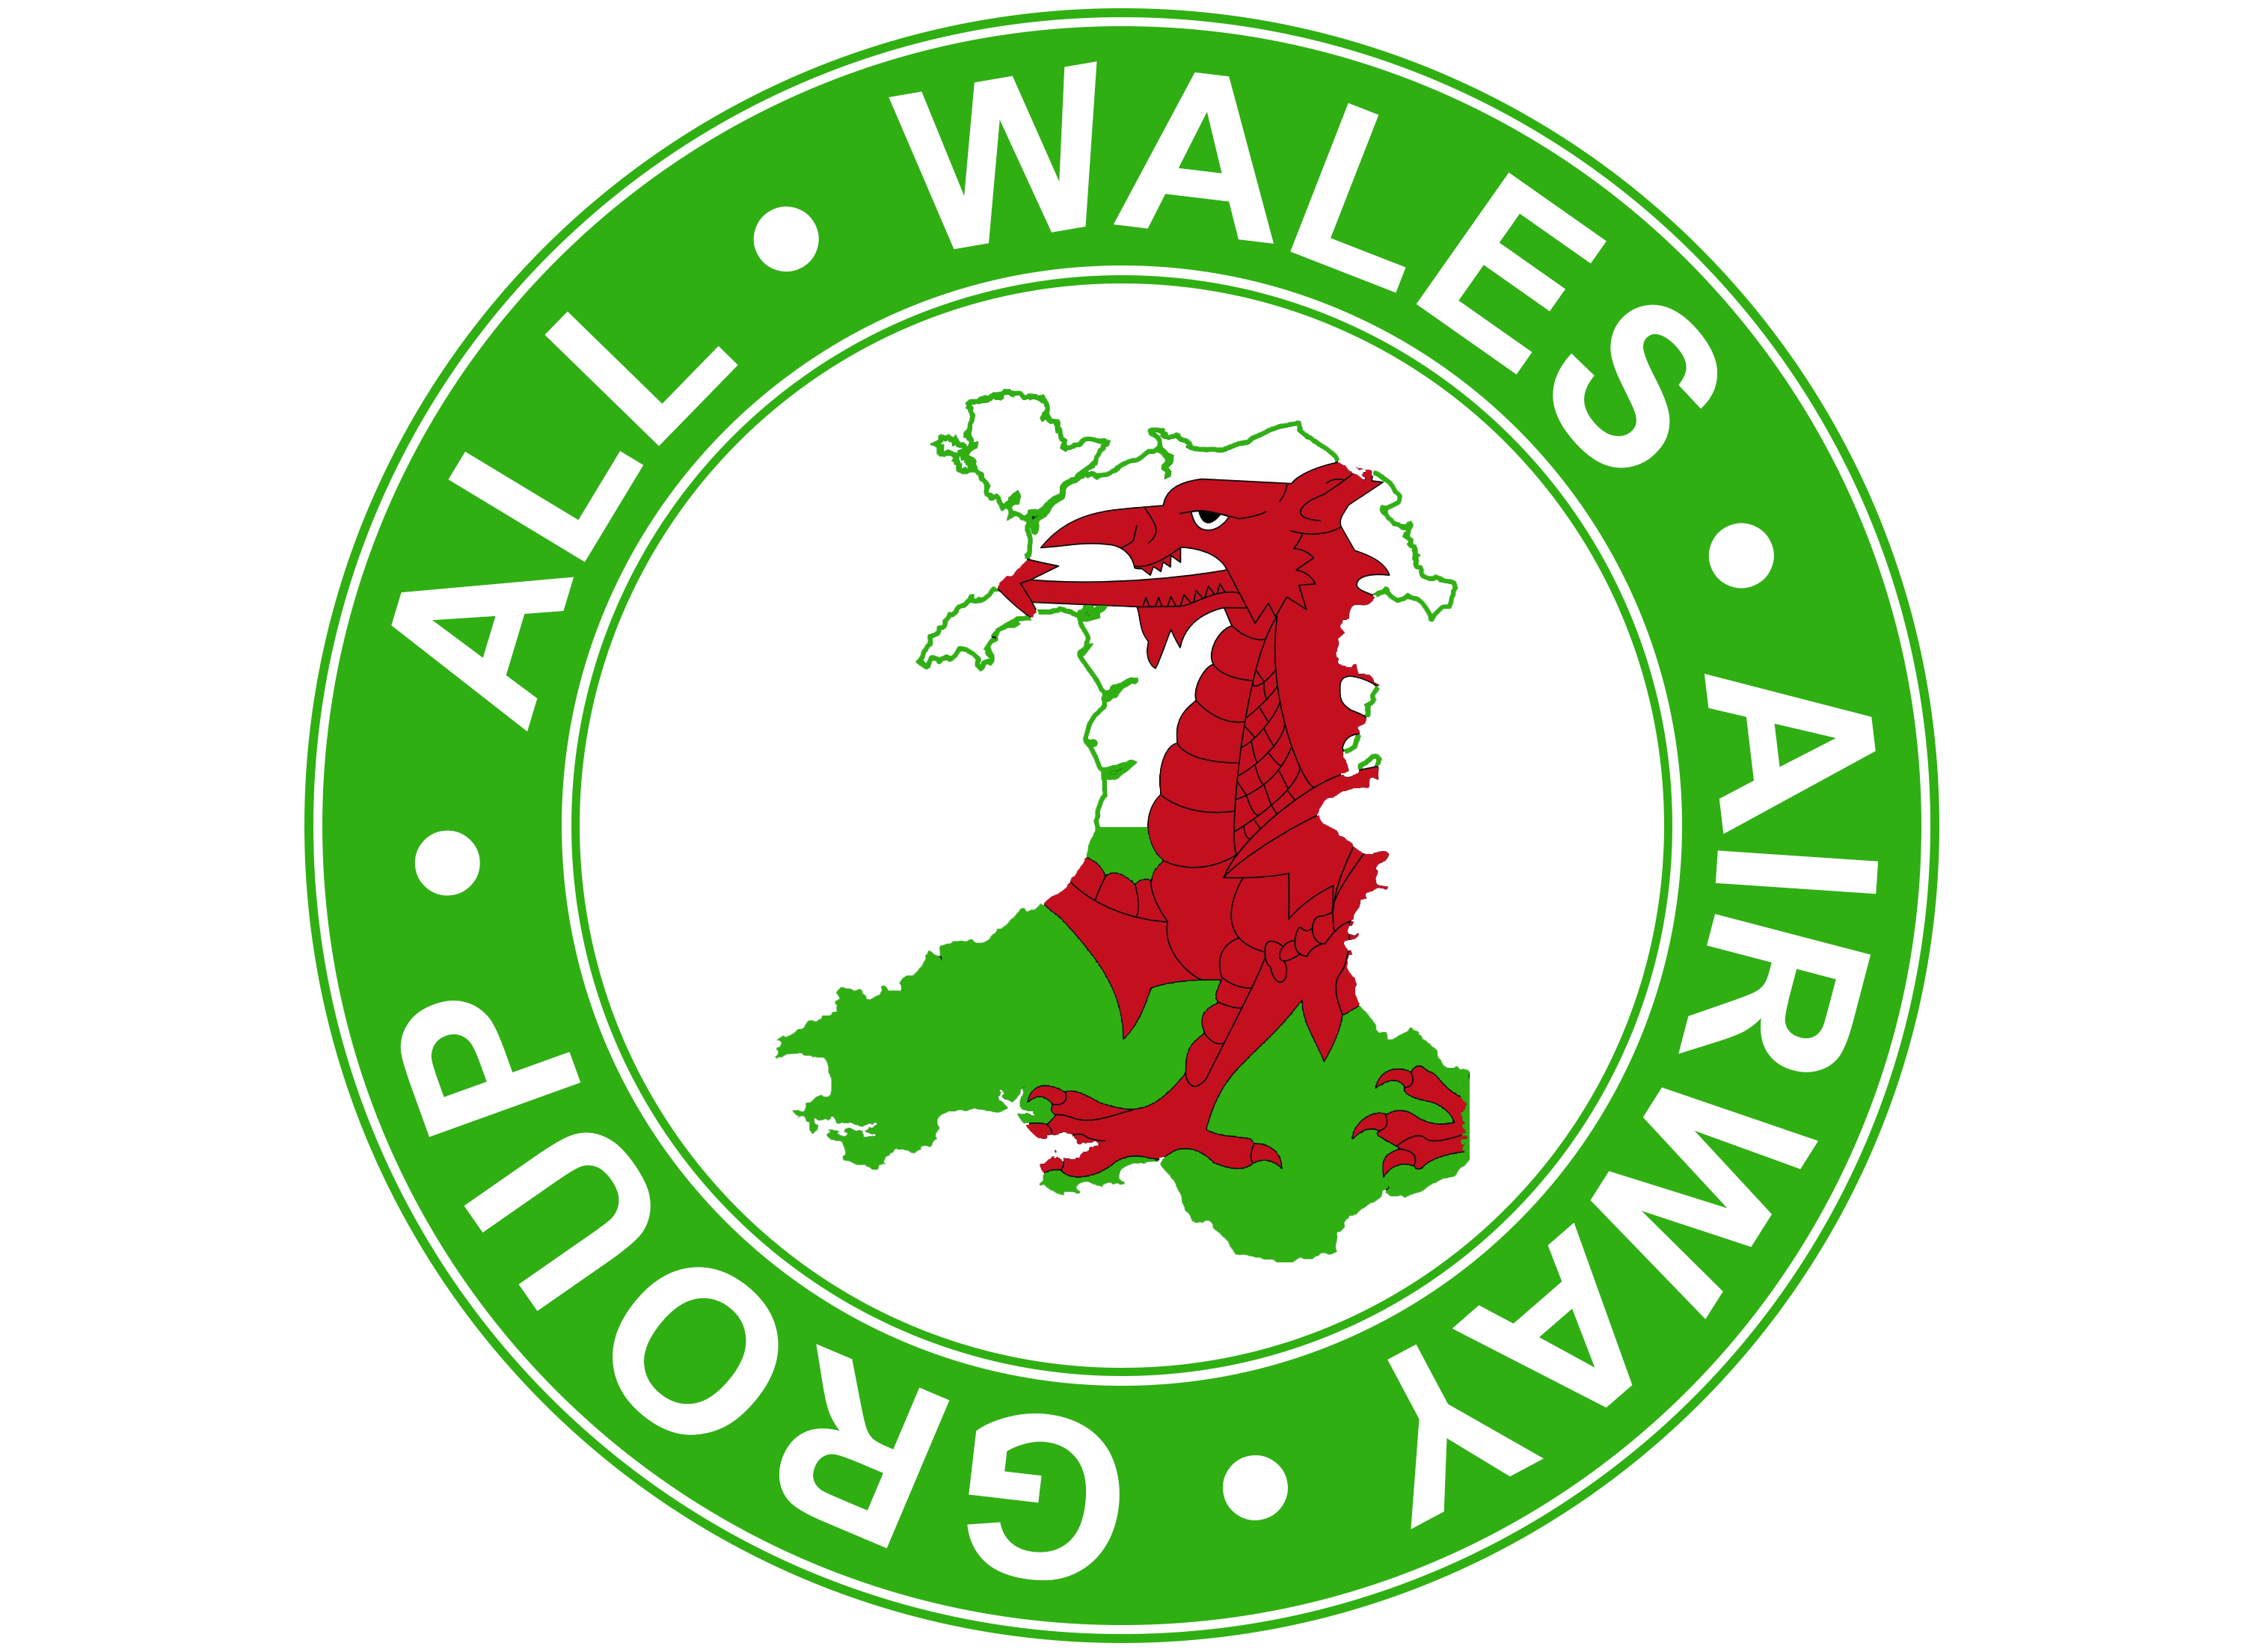 All Wales Airway Group